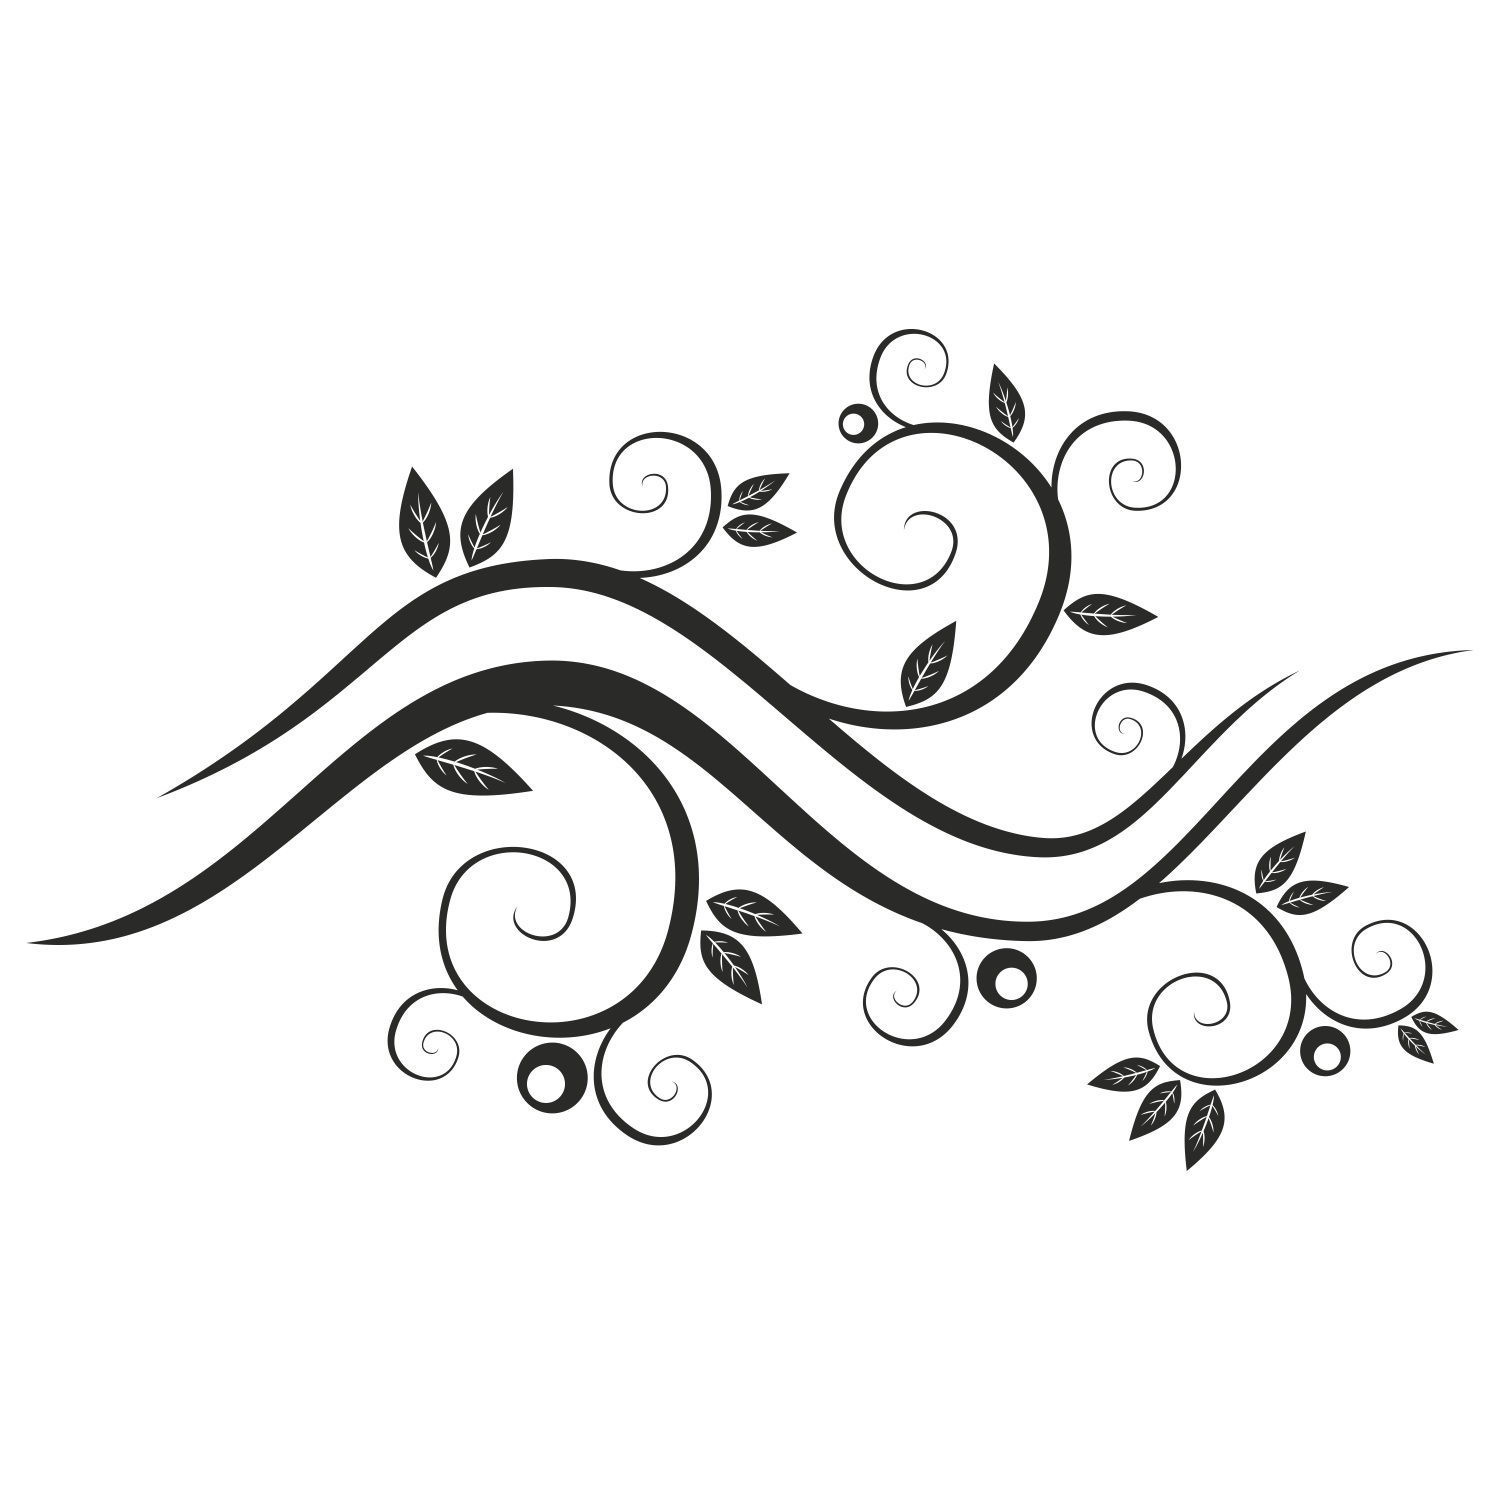 Free Floral Png Vector, Download Free Clip Art, Free Clip